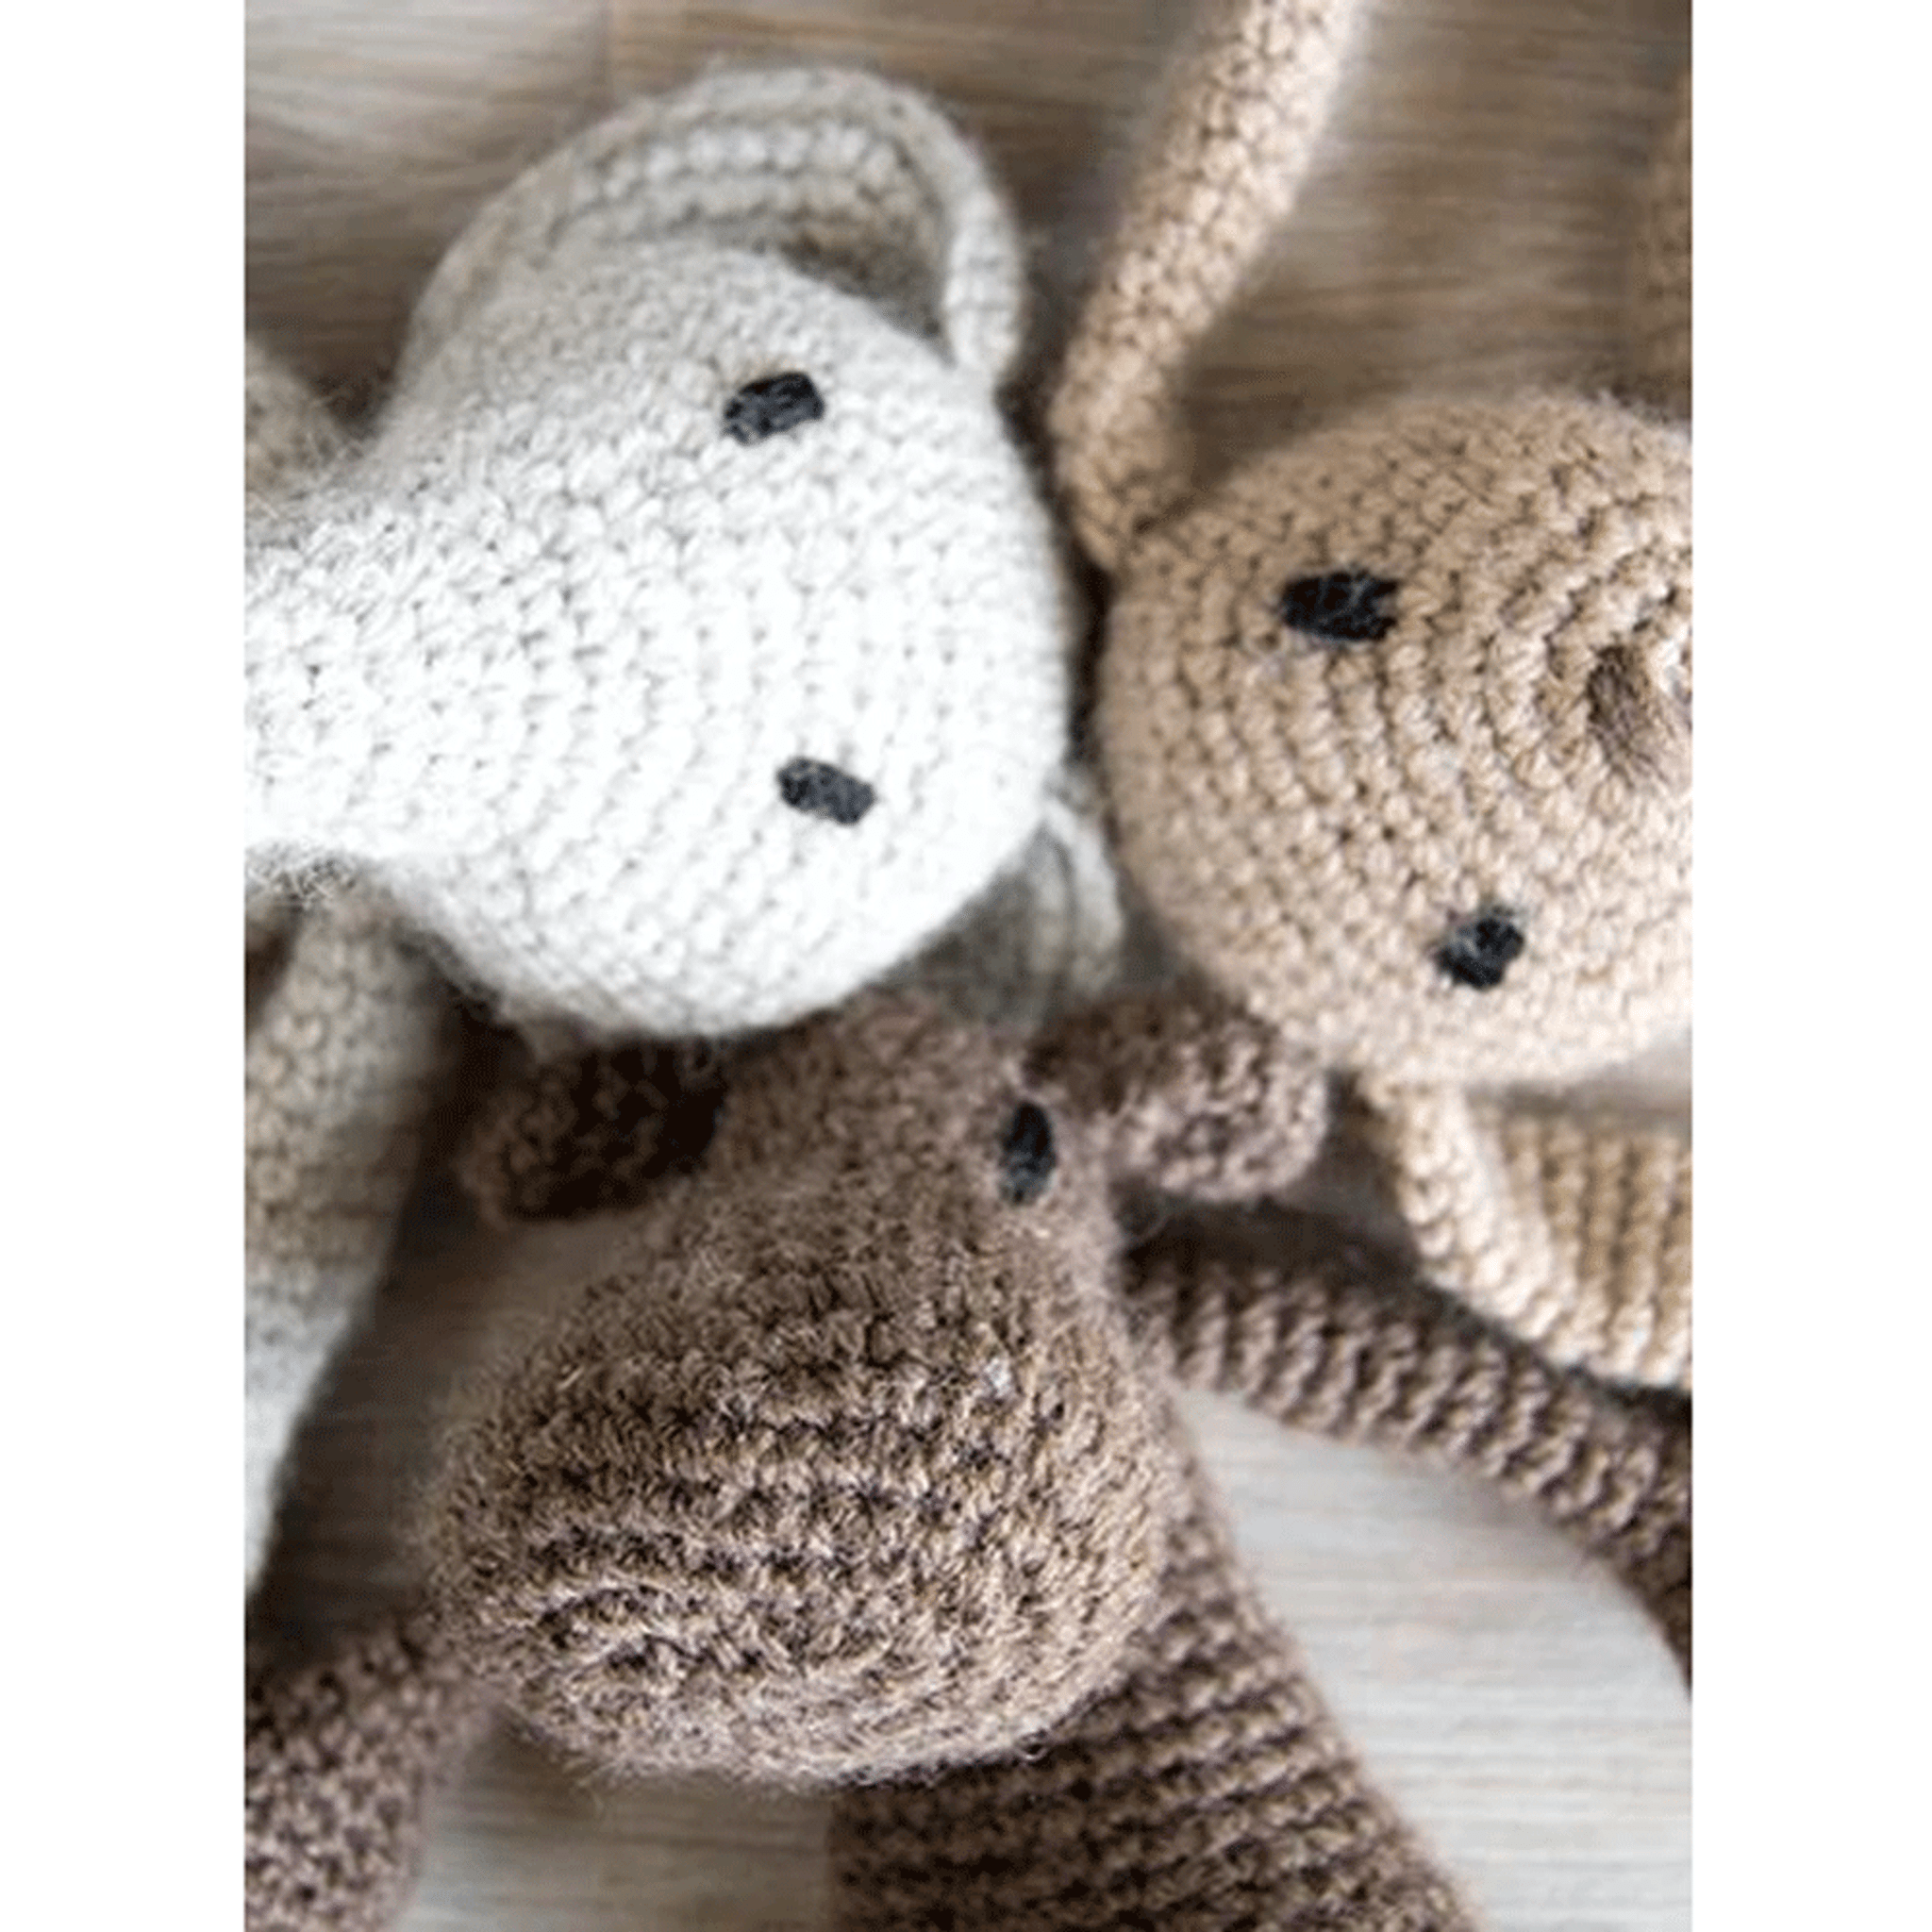 Crochet Kit for a Cute Amigurumi Animal Toy Bella the Baby Bunny DIY Kit/crafting  Kit/starter Pack 